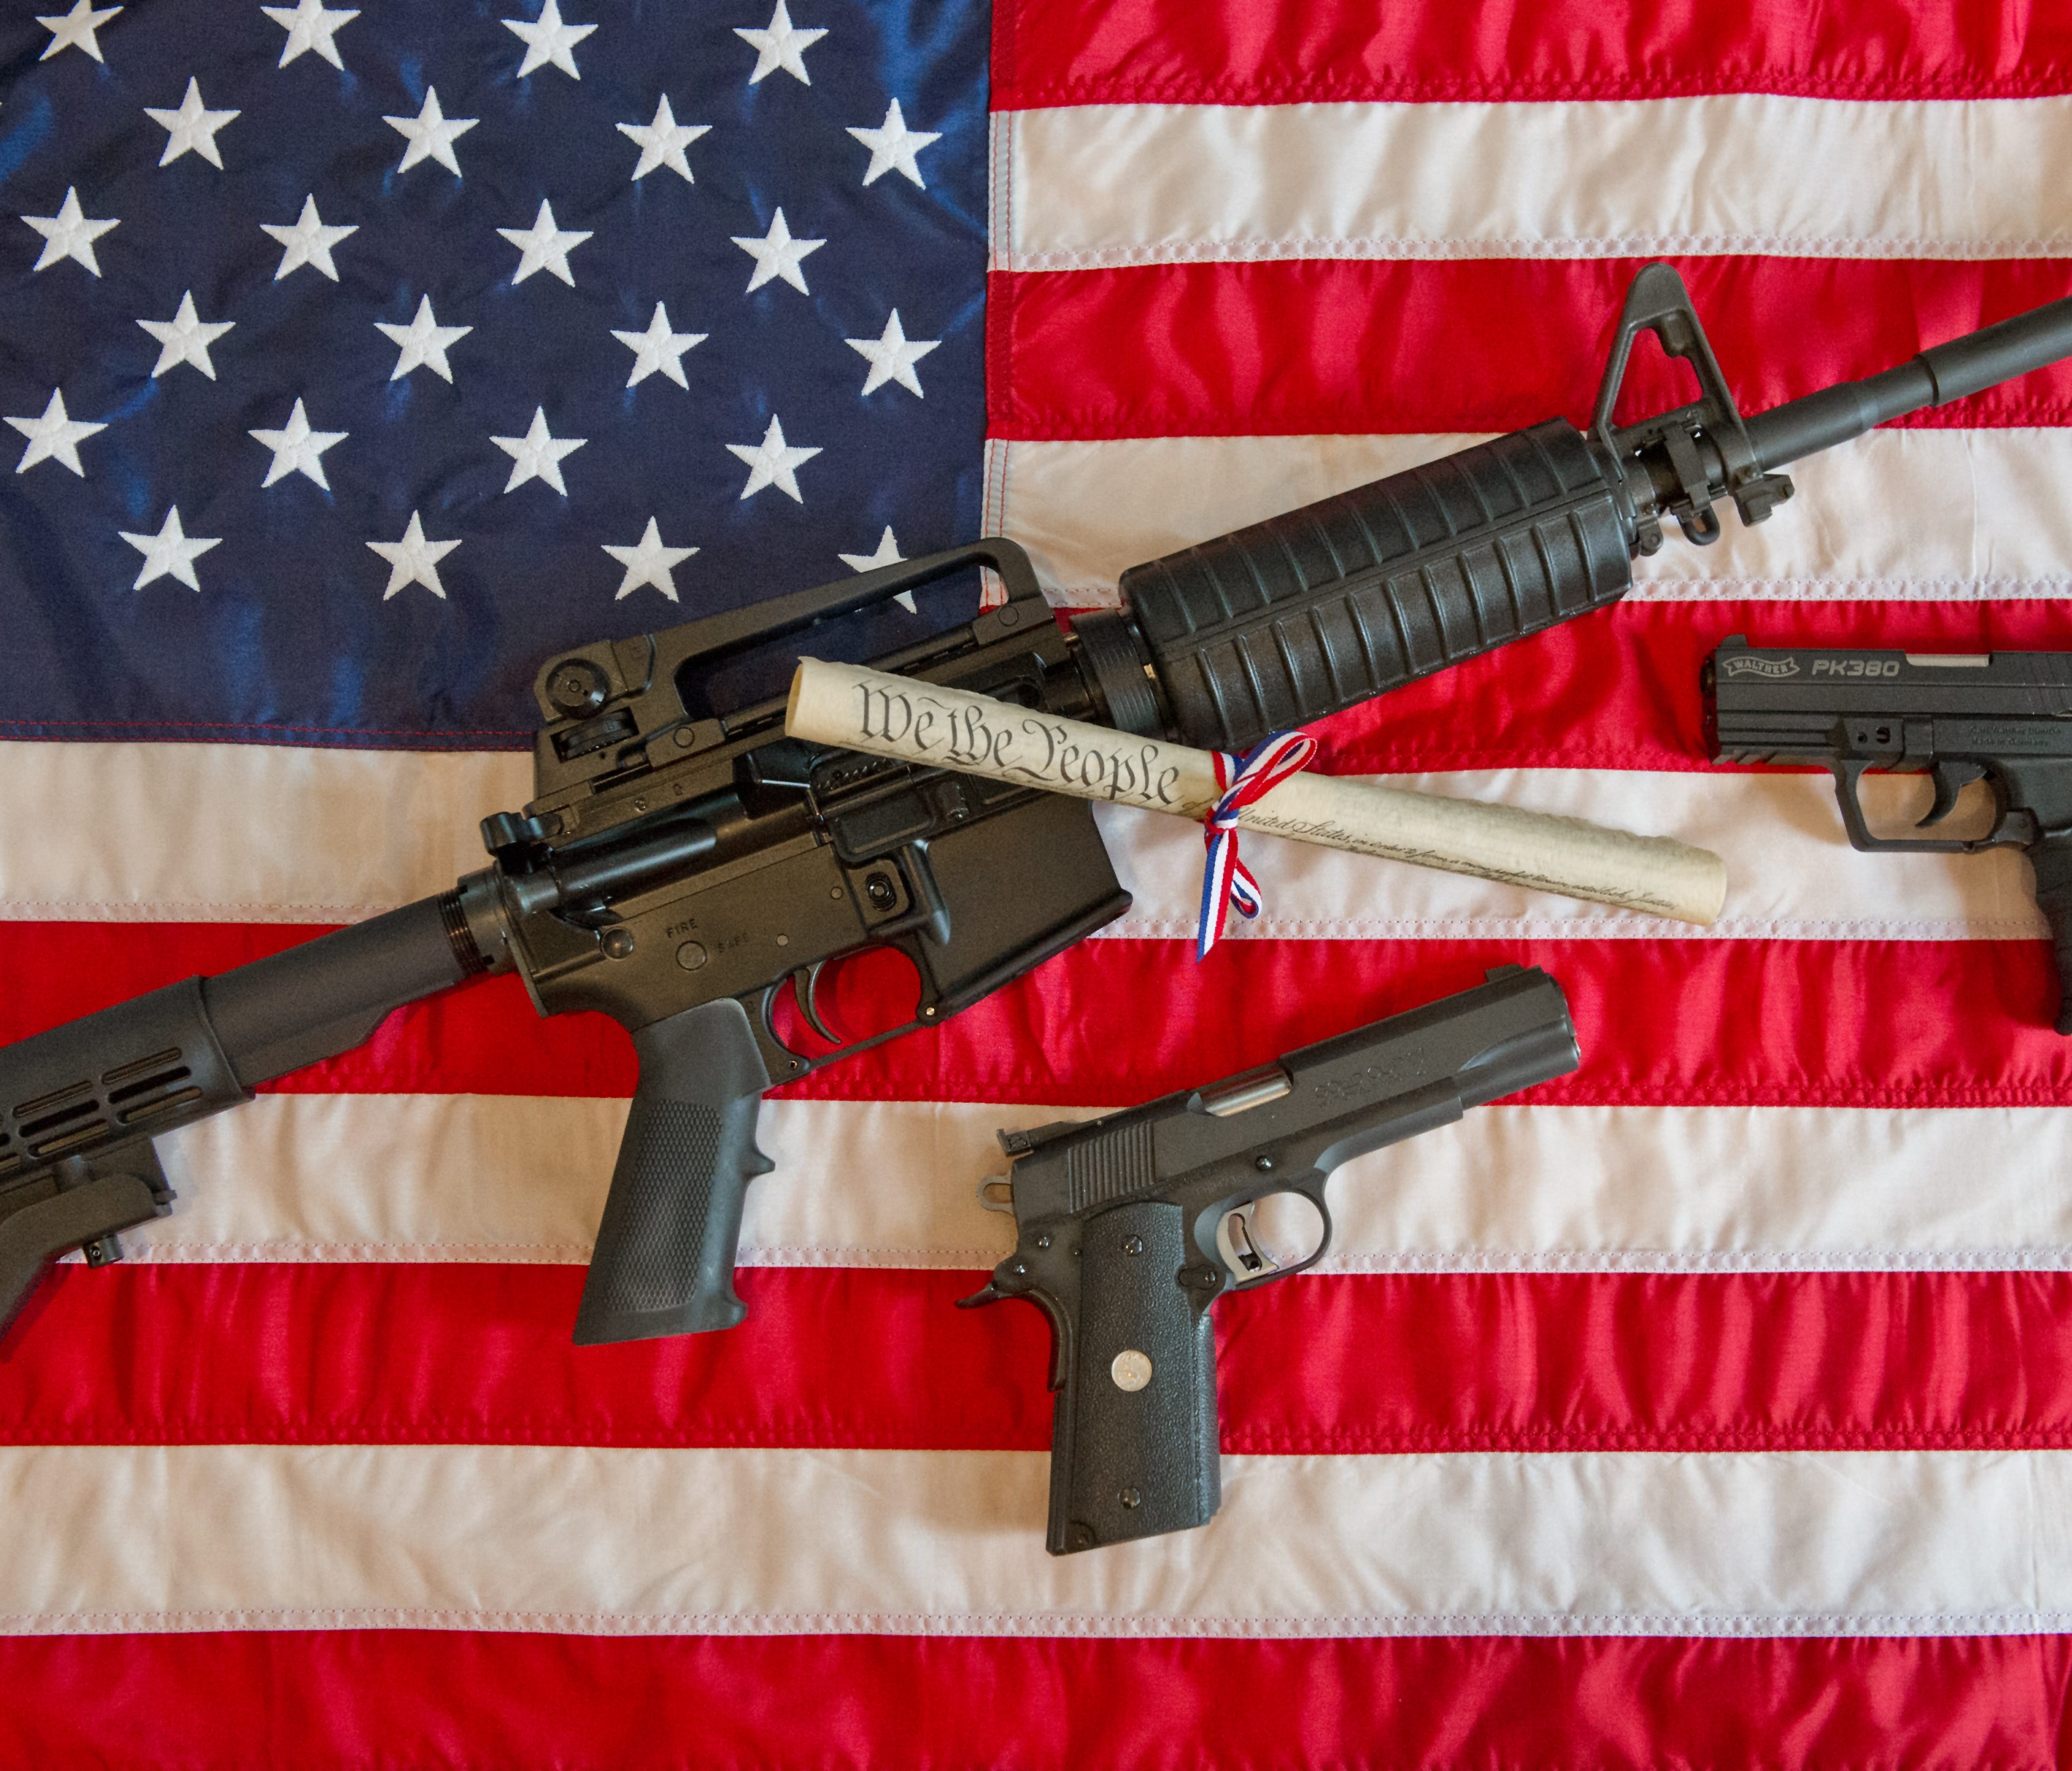 Americans own 42% of about 650 million civilian firearms worldwide, according to the Small Arms Survey.